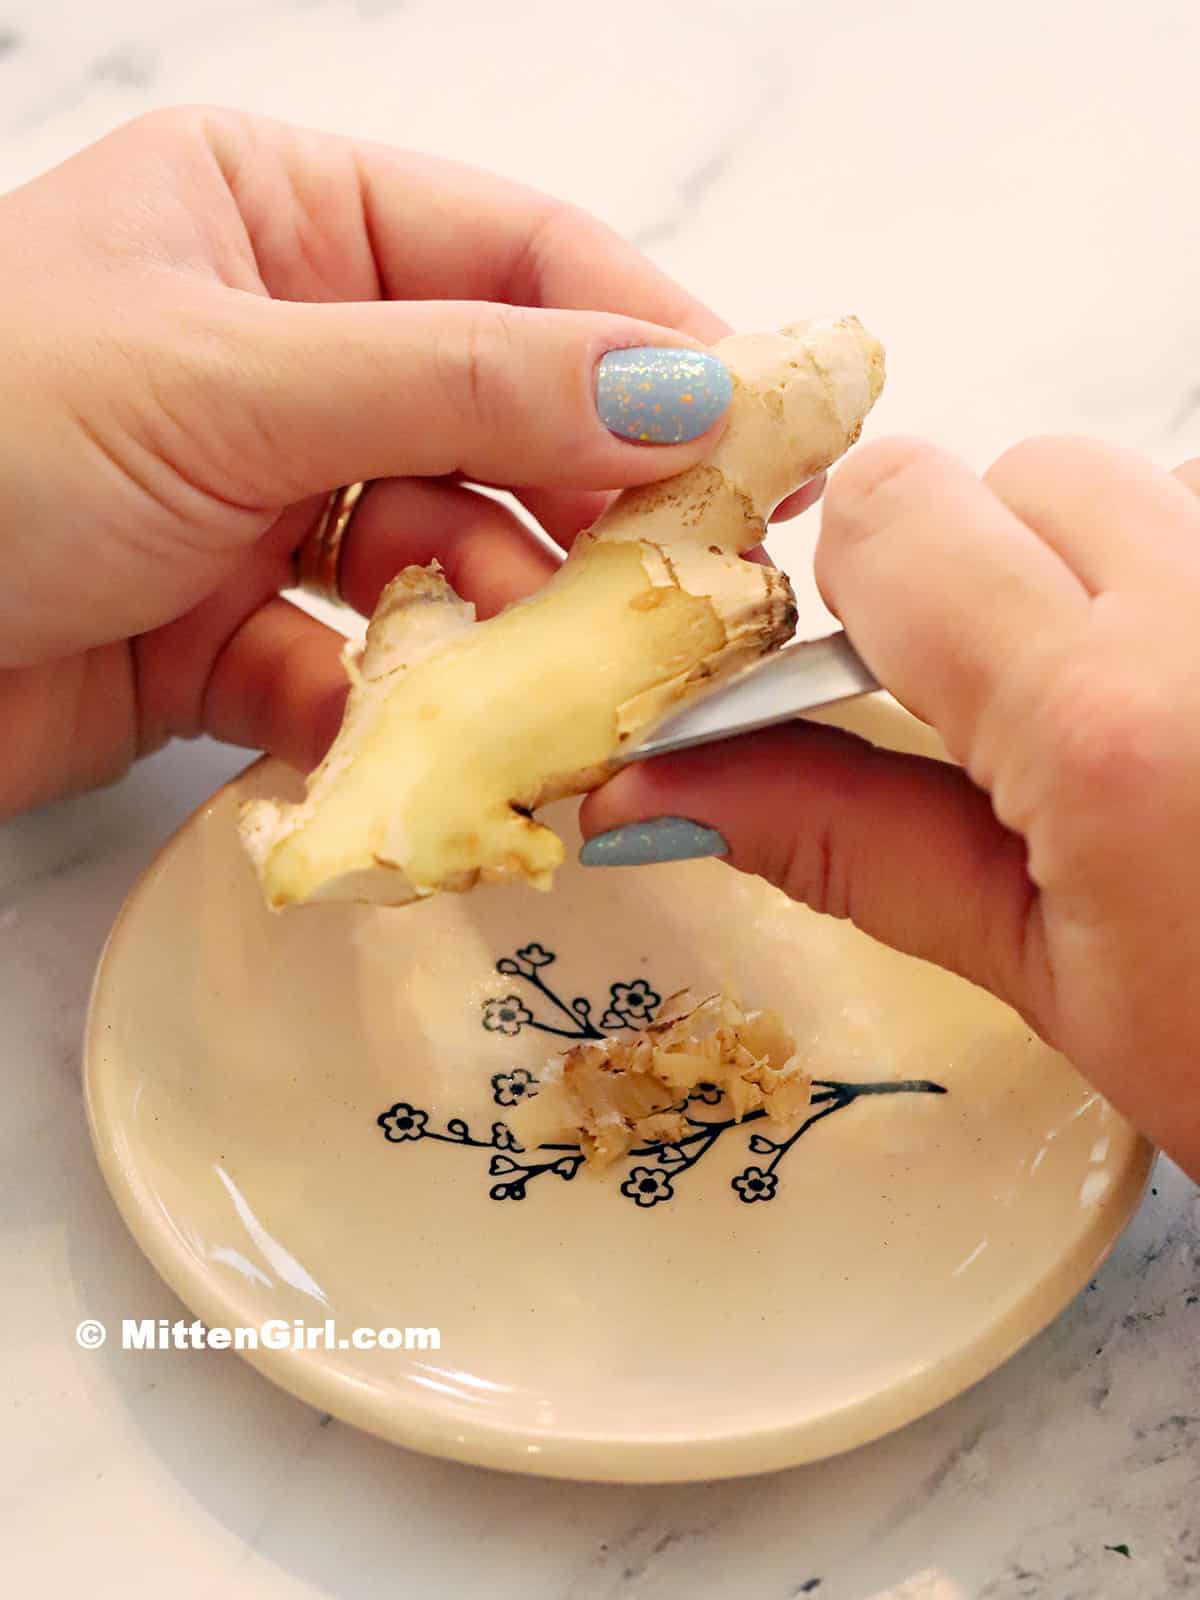 Hands peeling a piece of ginger root using a spoon.